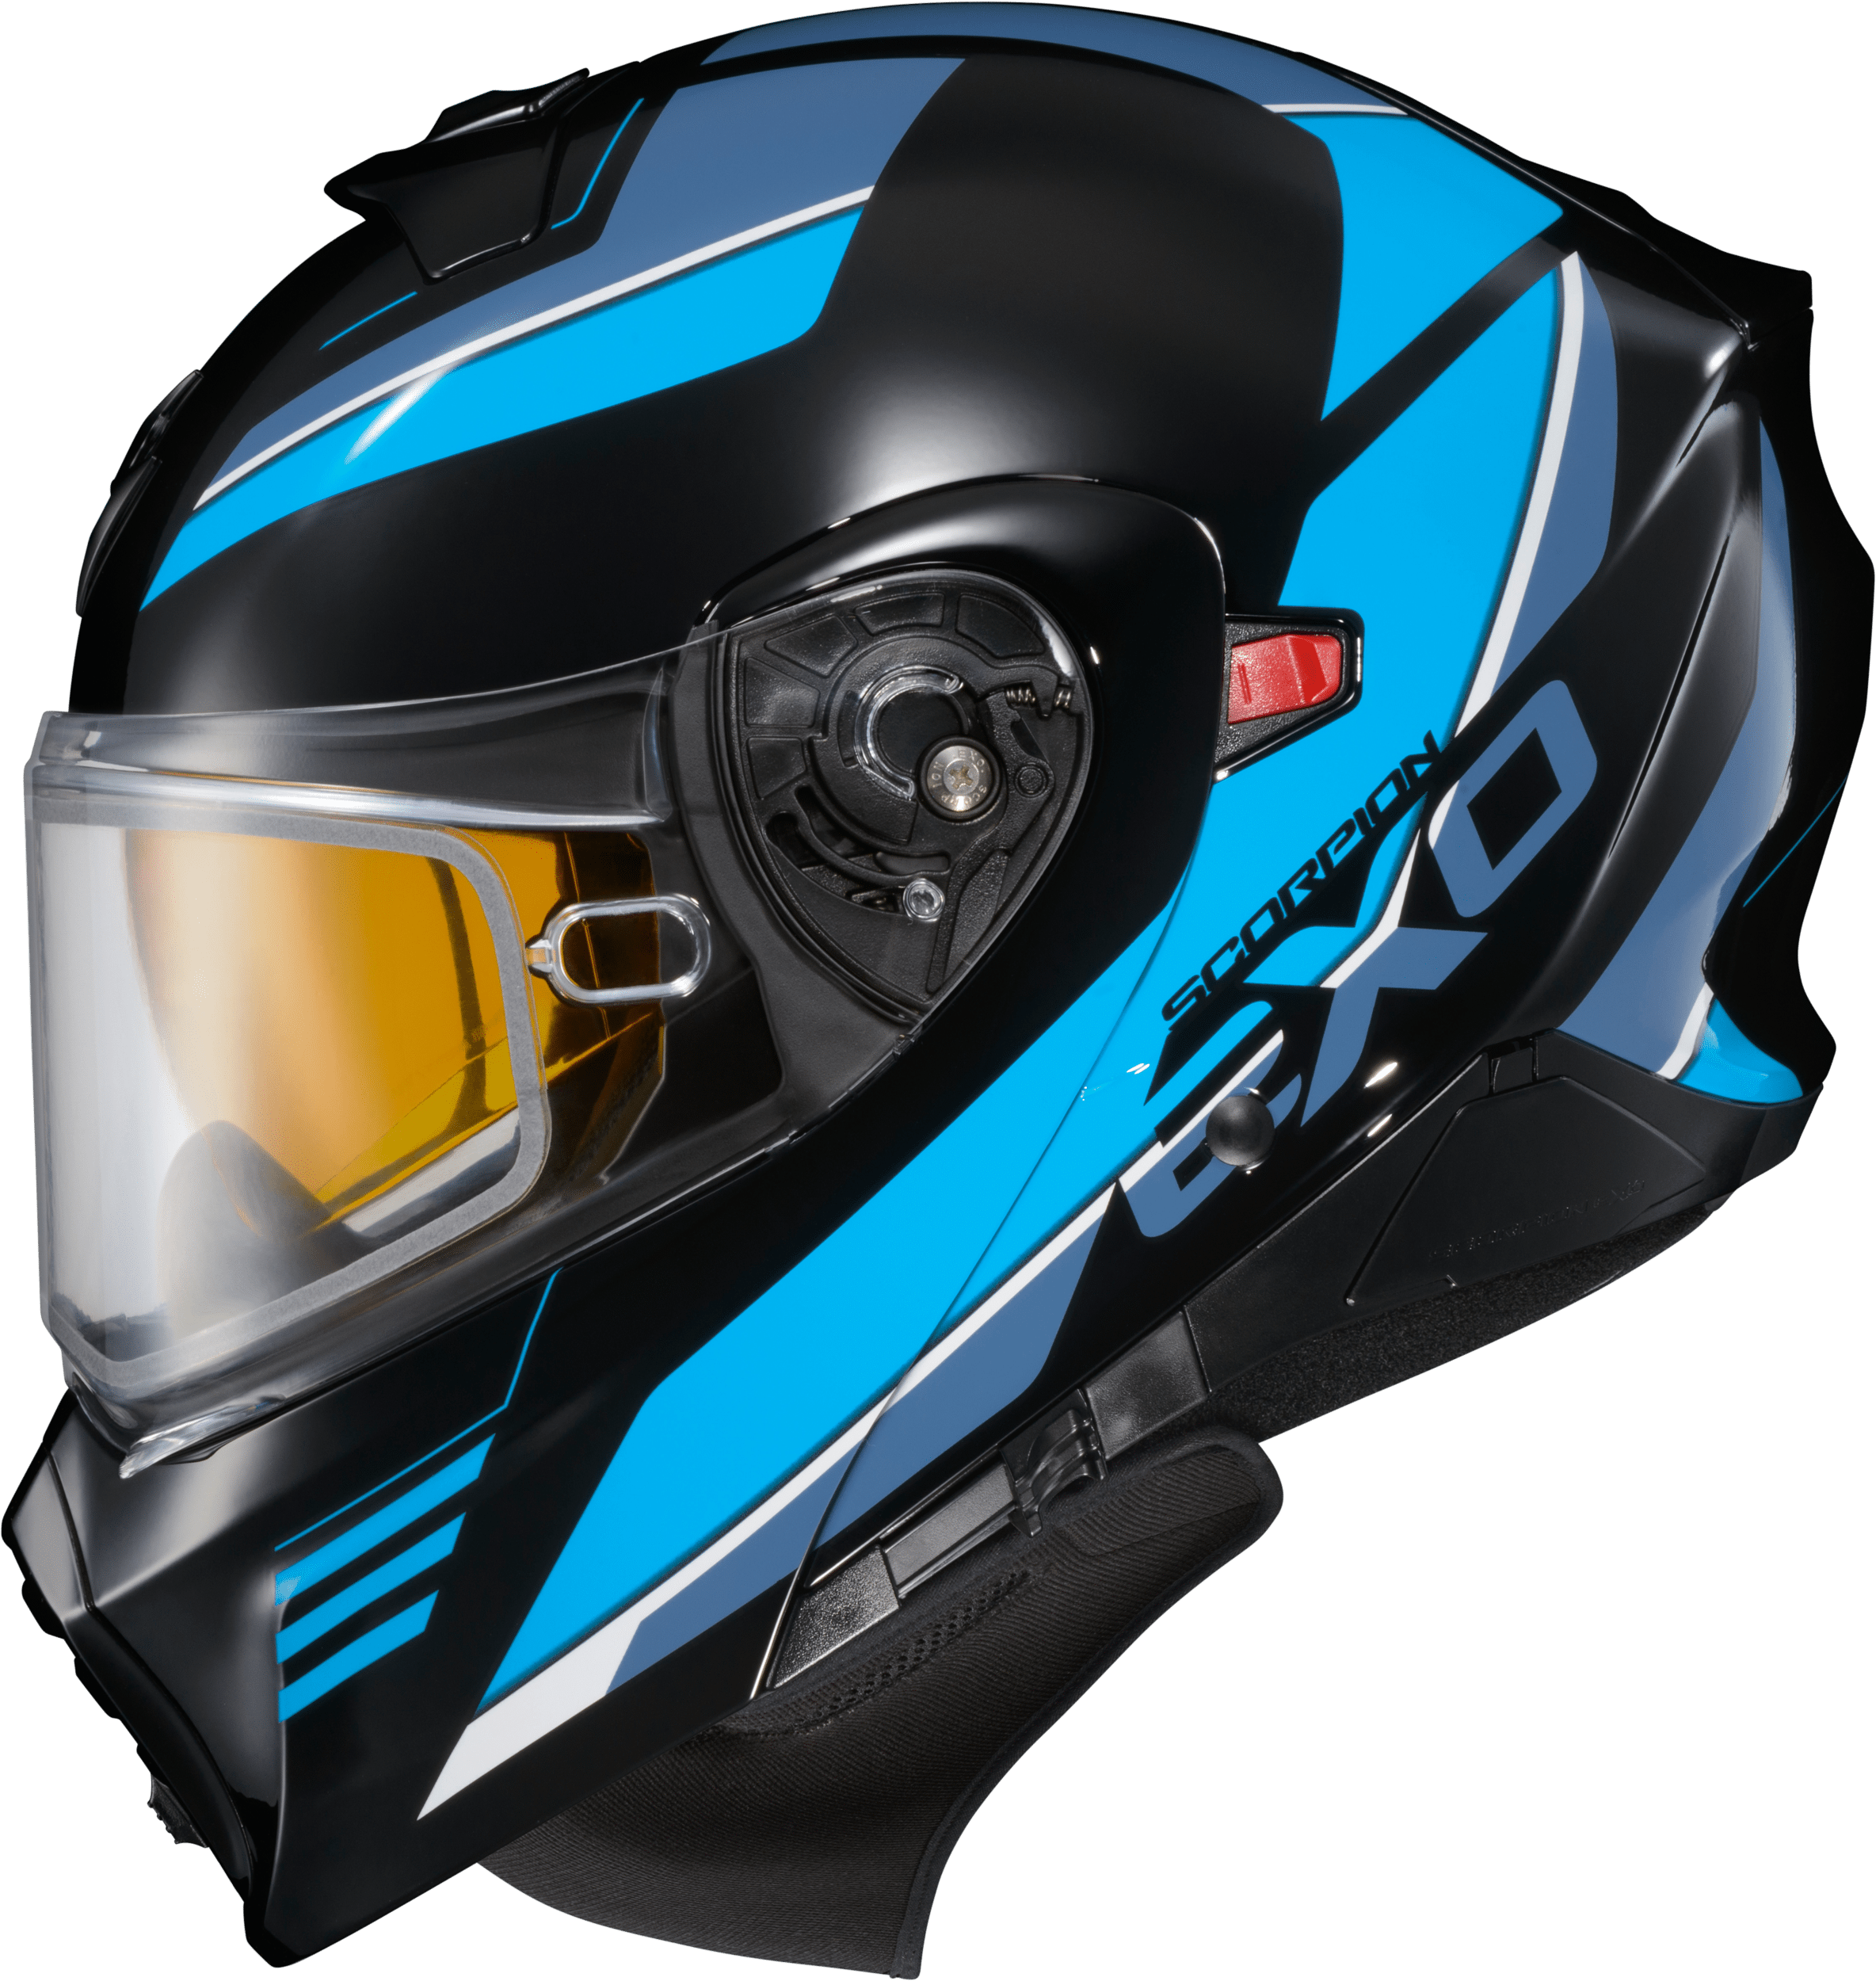 Western Powersports Full Face Helmet Black/Blue / 2X-Large EXO-GT930 Cold Weather Helmet by Scorpion Exo 93-1057-SD